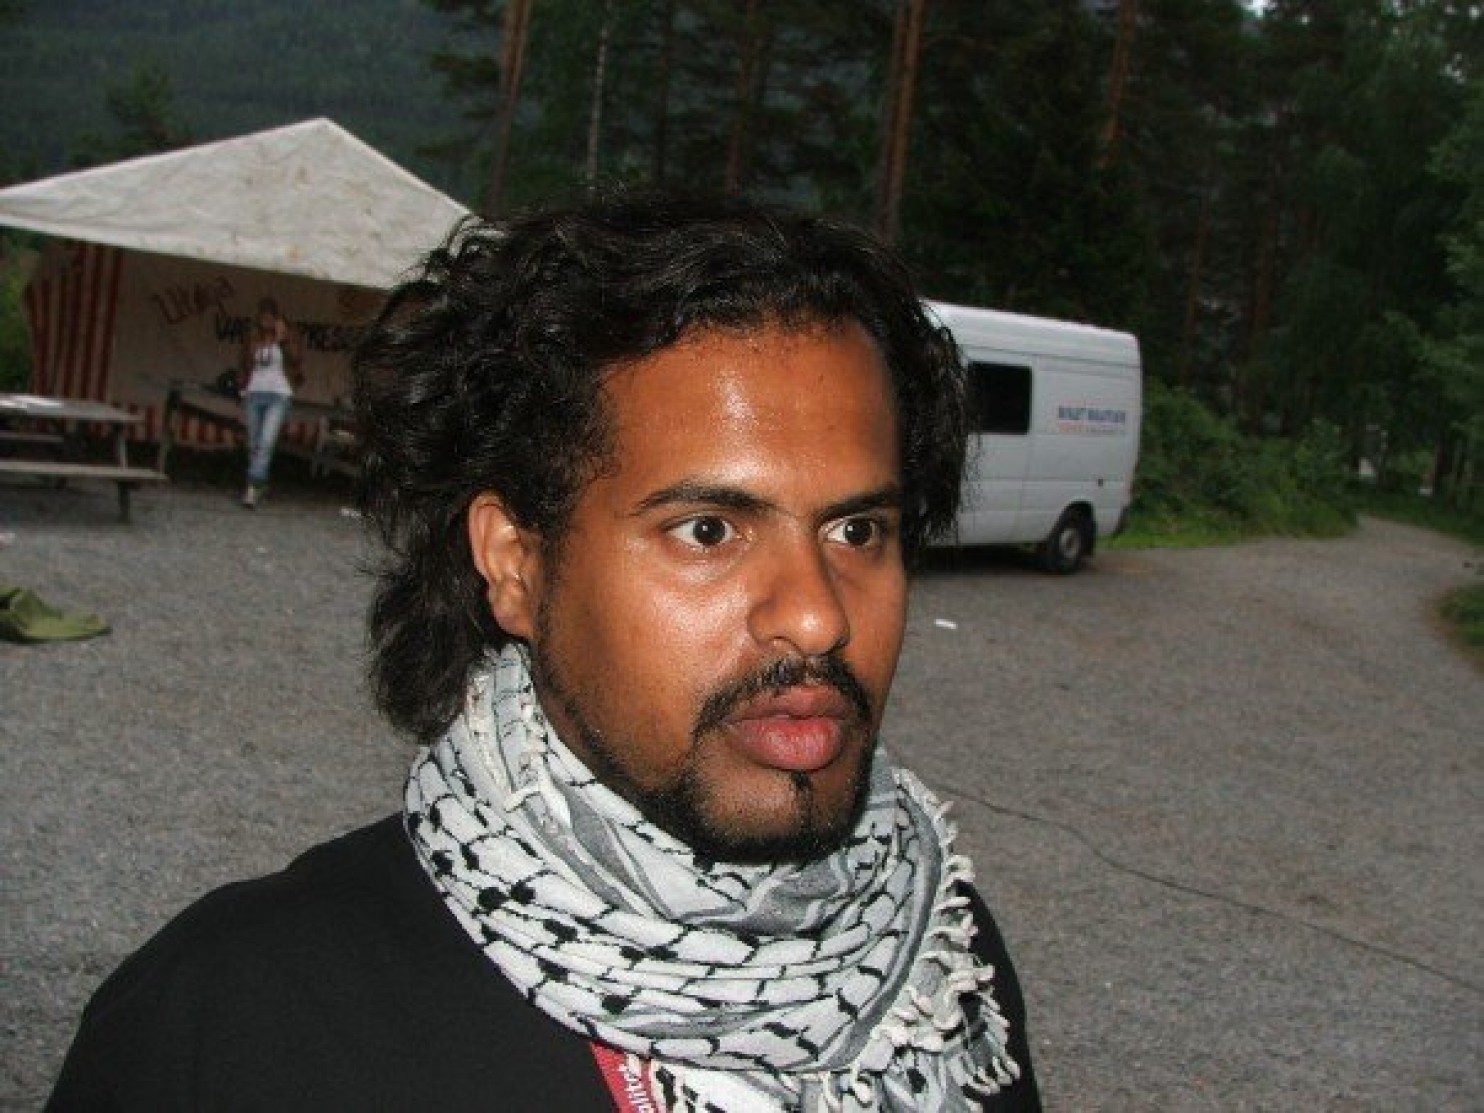 Khalid Ahmed survived the Utoya attack, but has now been deported. (Credit: Family photo, provided by Chris Klemmetvold)